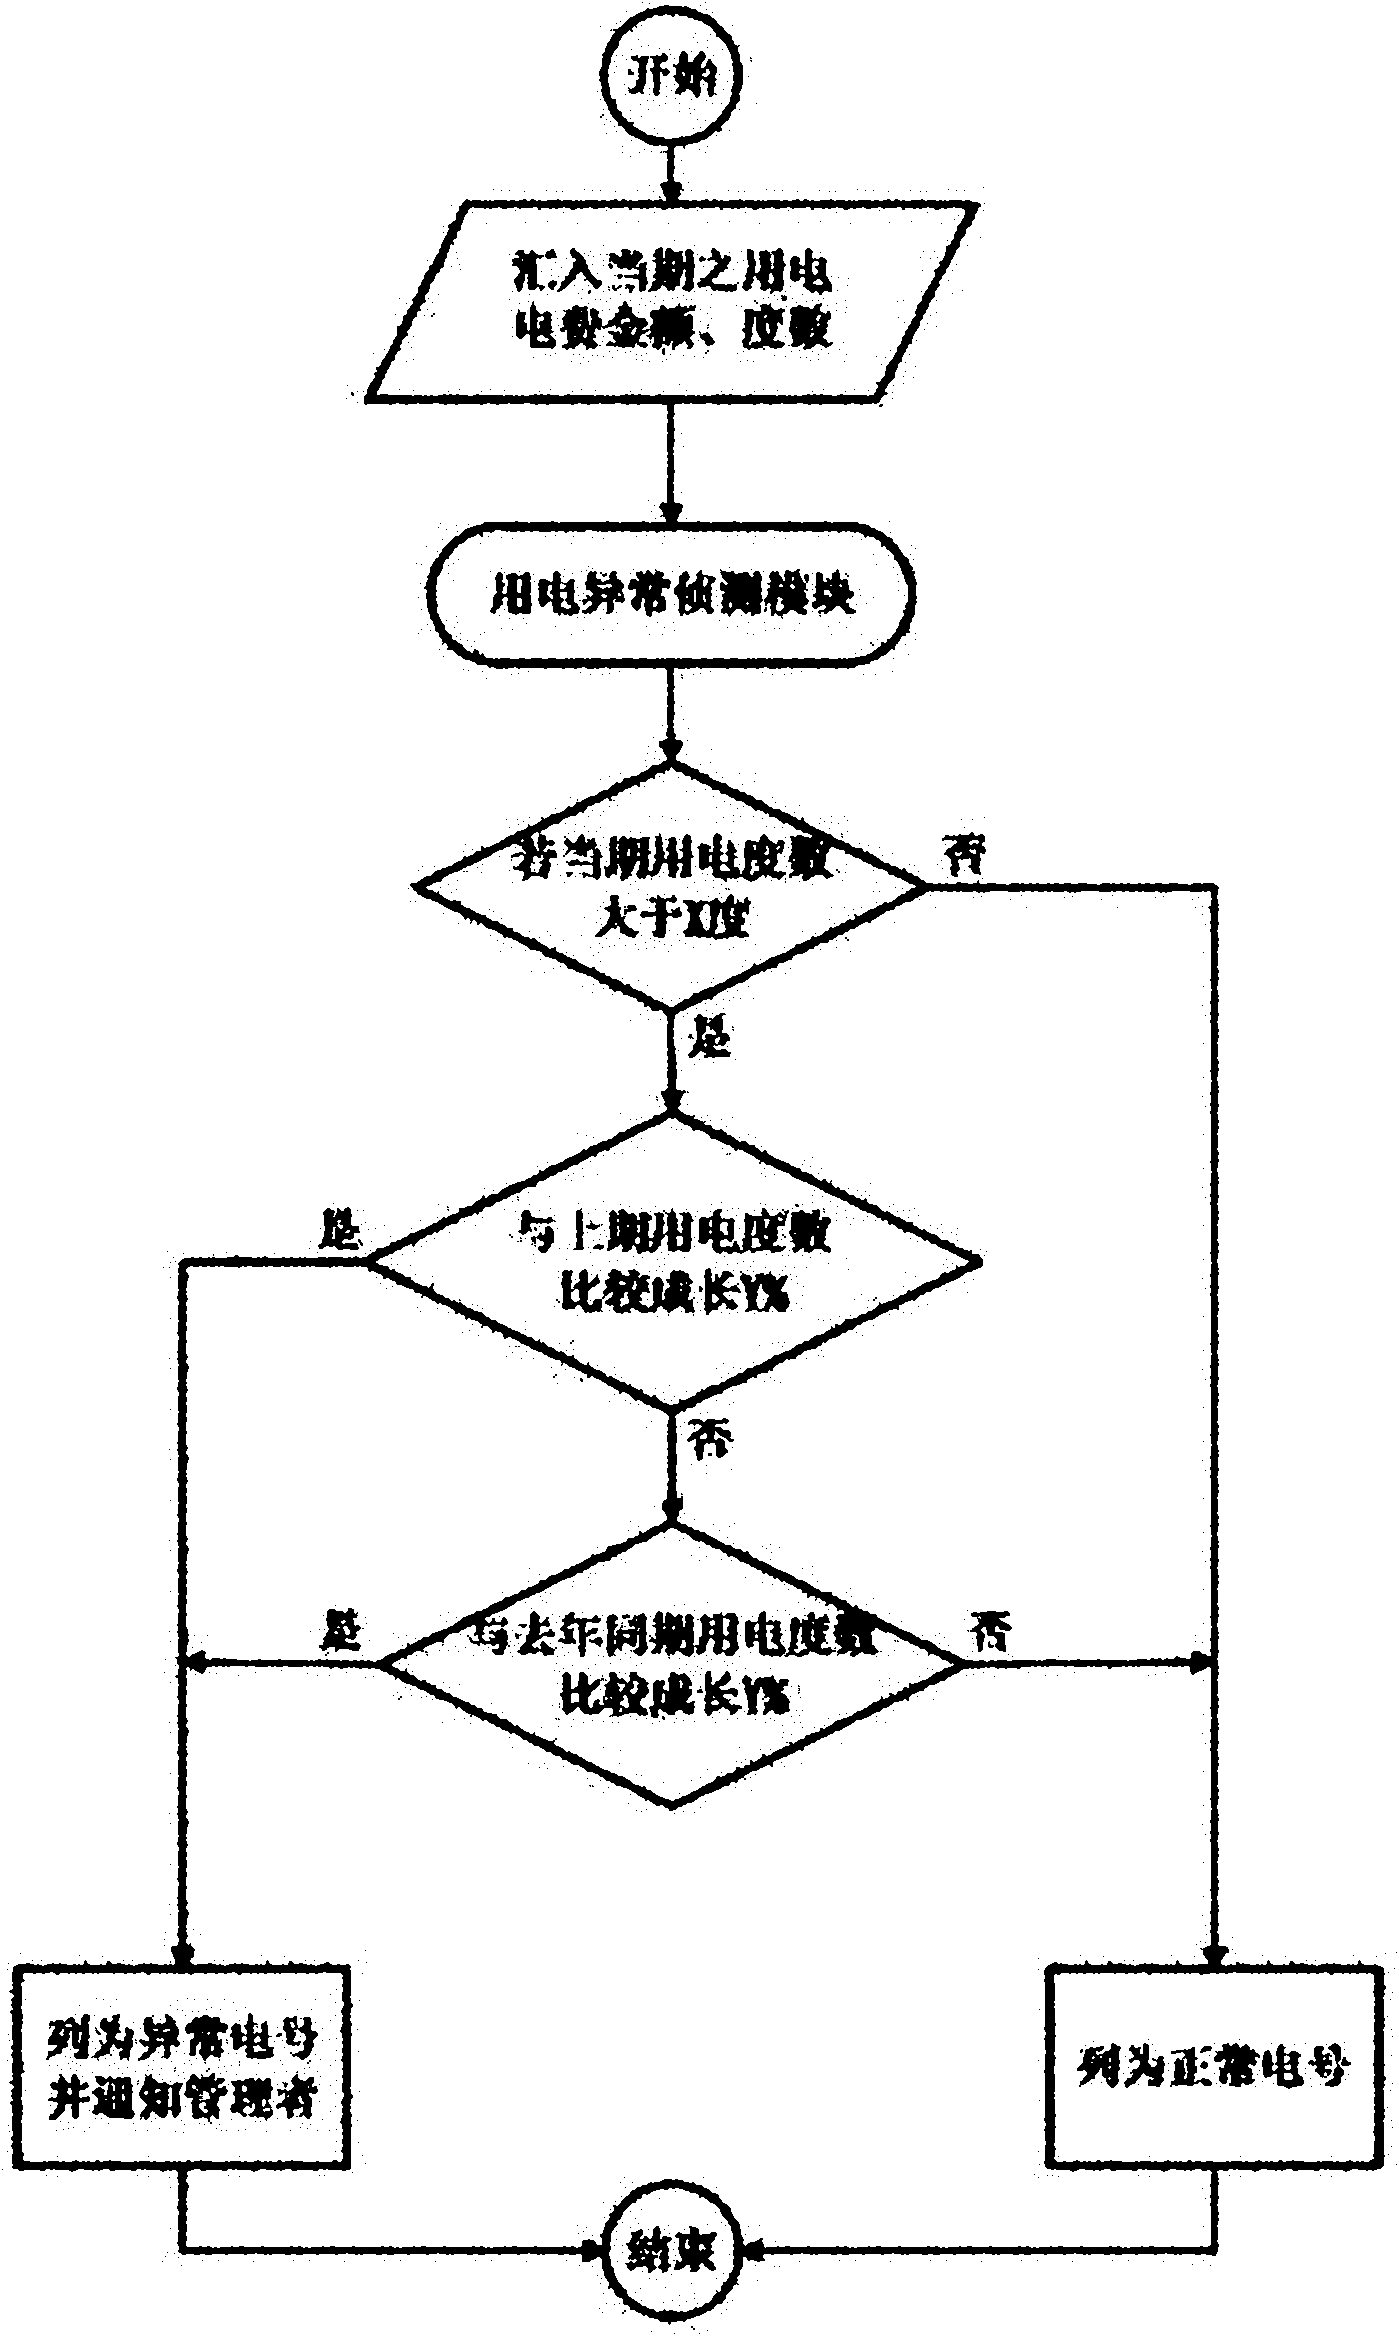 Power utilization management system and method